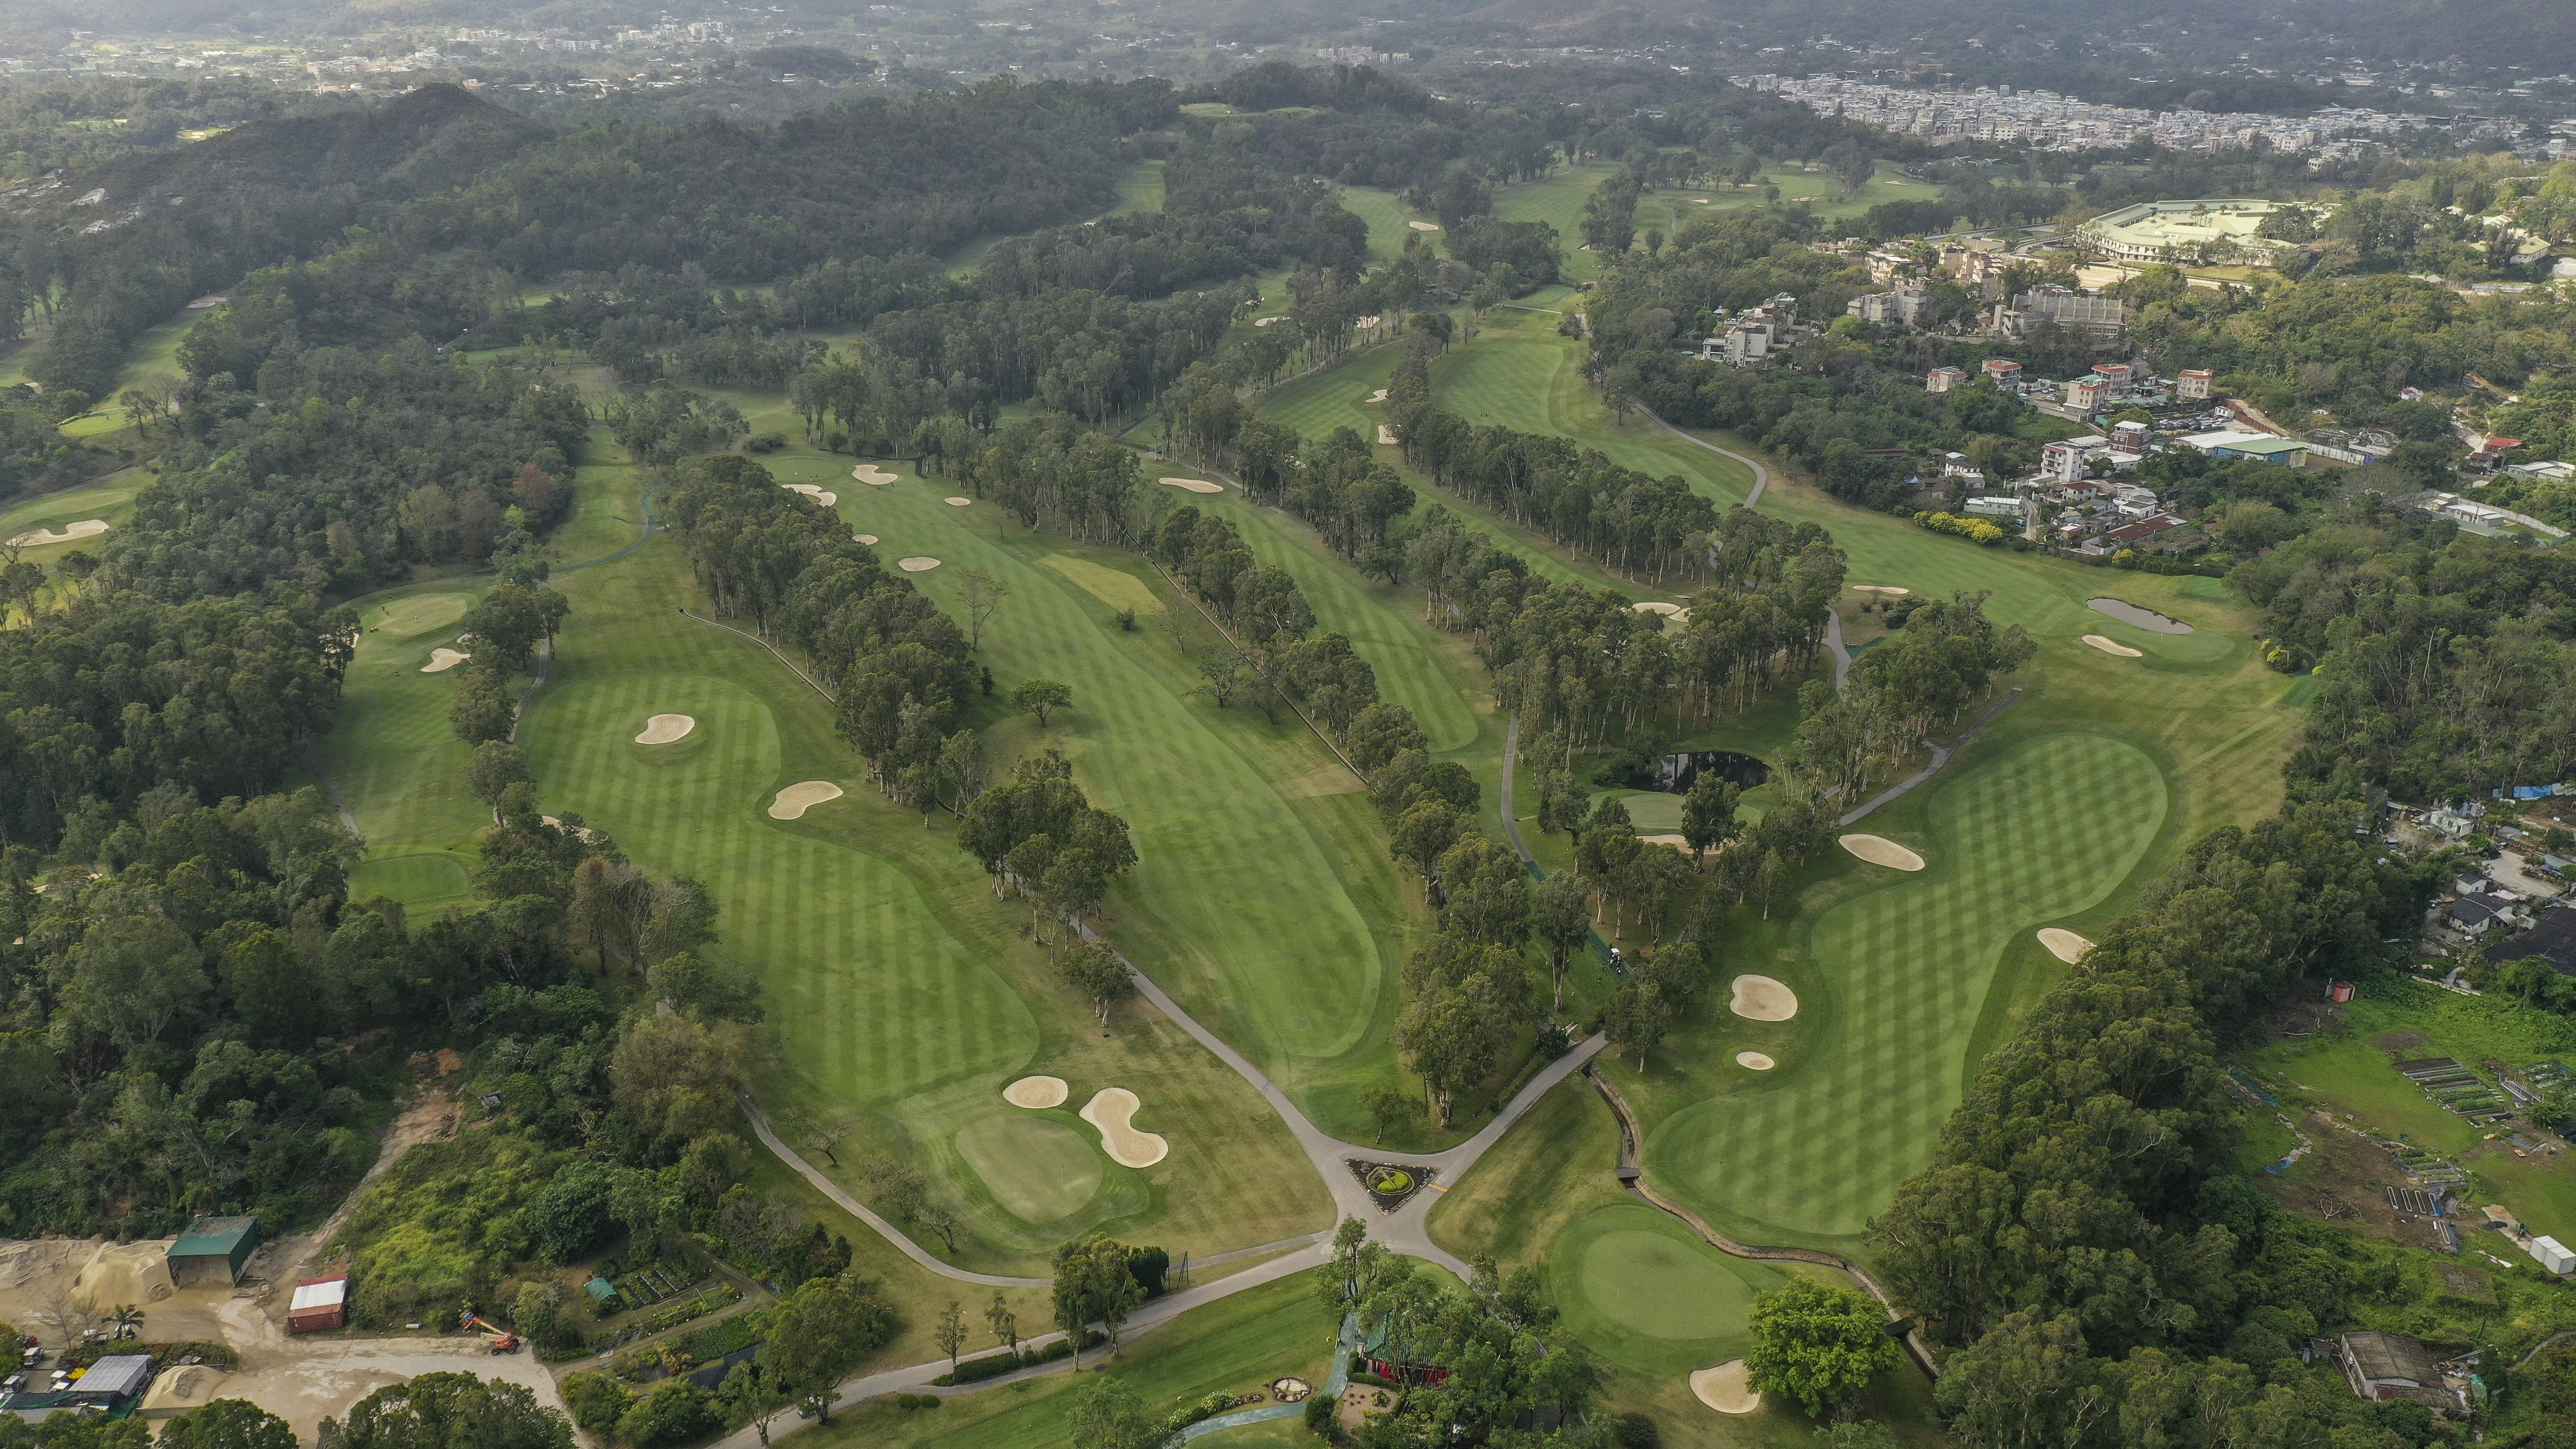 Hong Kong Golf Club in Fanling. A land supply task force said taking one-fifth of the 172-hectare course would help ease the city's housing crisis. Photo: Winson Wong